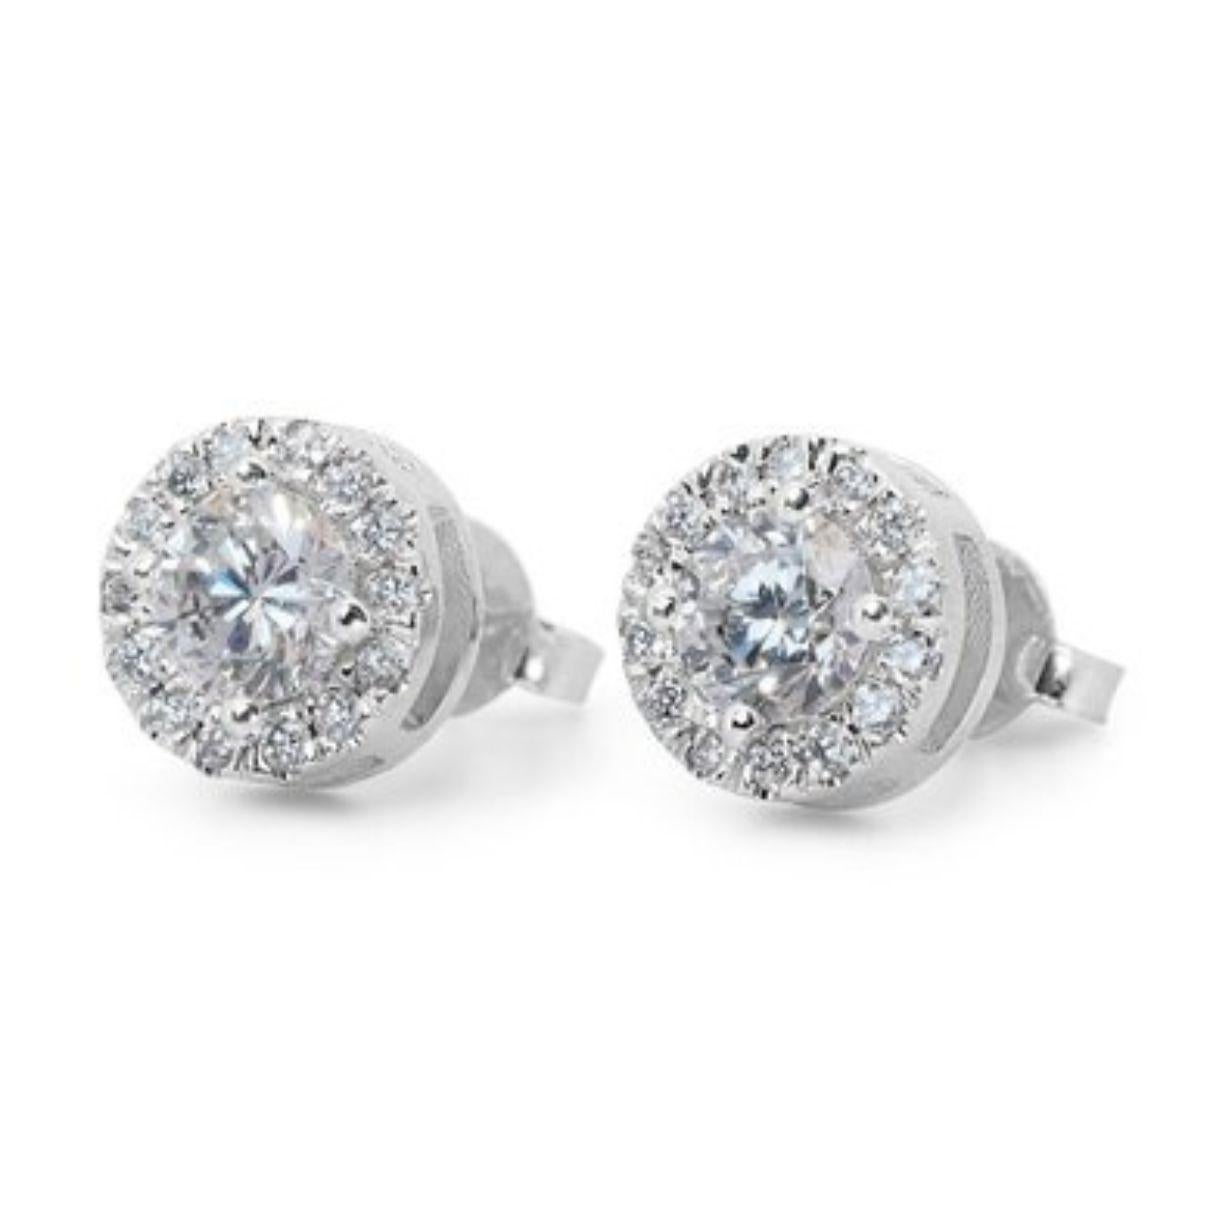 Round Cut Exquisite 1.14 Carat D Color VVS1 Diamond Halo Earrings in 18K White Gold For Sale